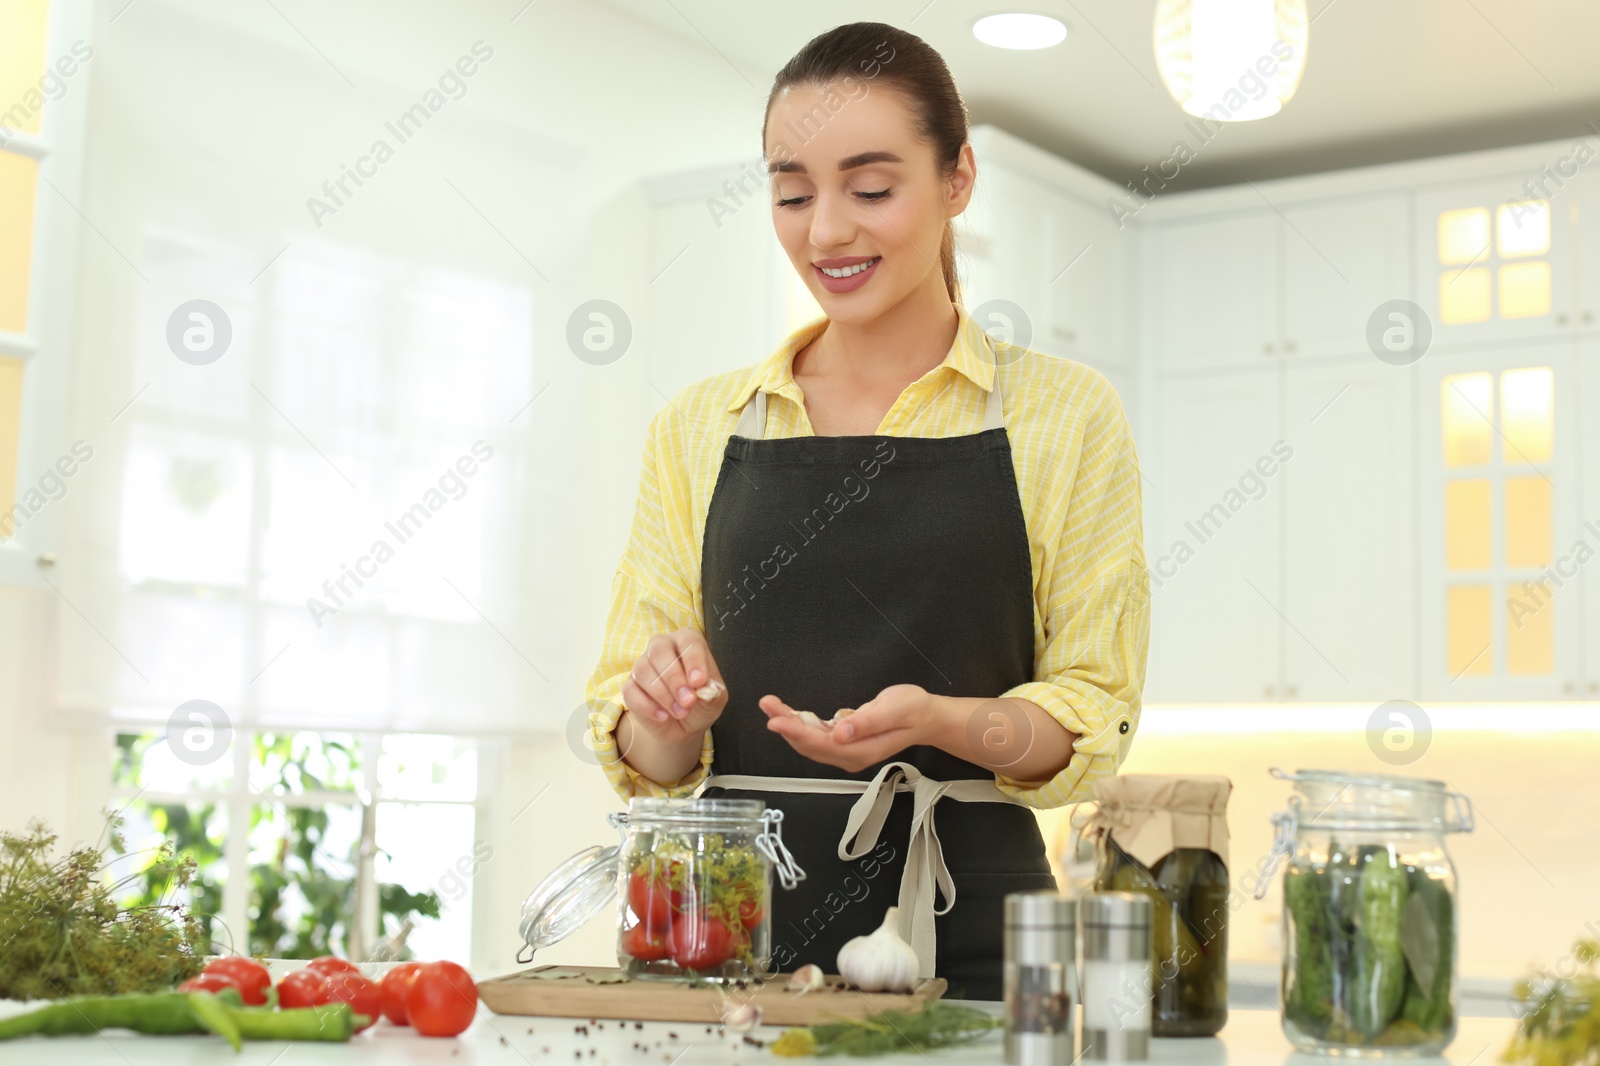 Photo of Woman putting garlic into pickling jar at table in kitchen